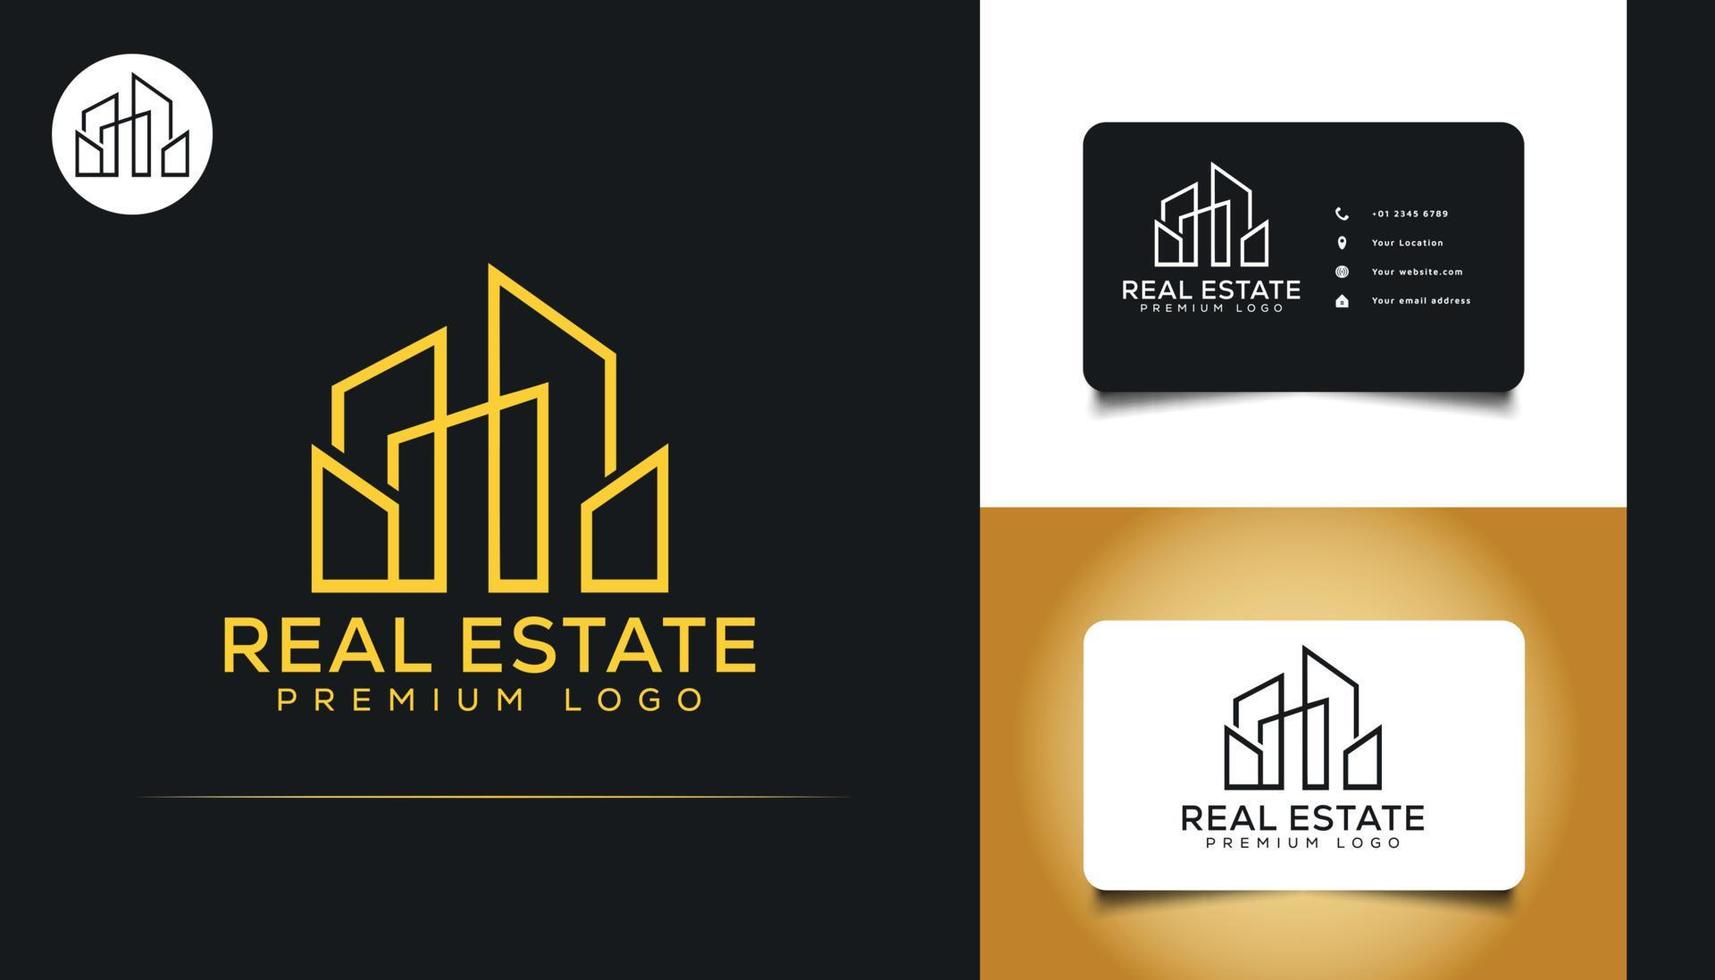 Abstract and Minimalist Real Estate Logo Design. Construction, Architecture or Building Logo vector